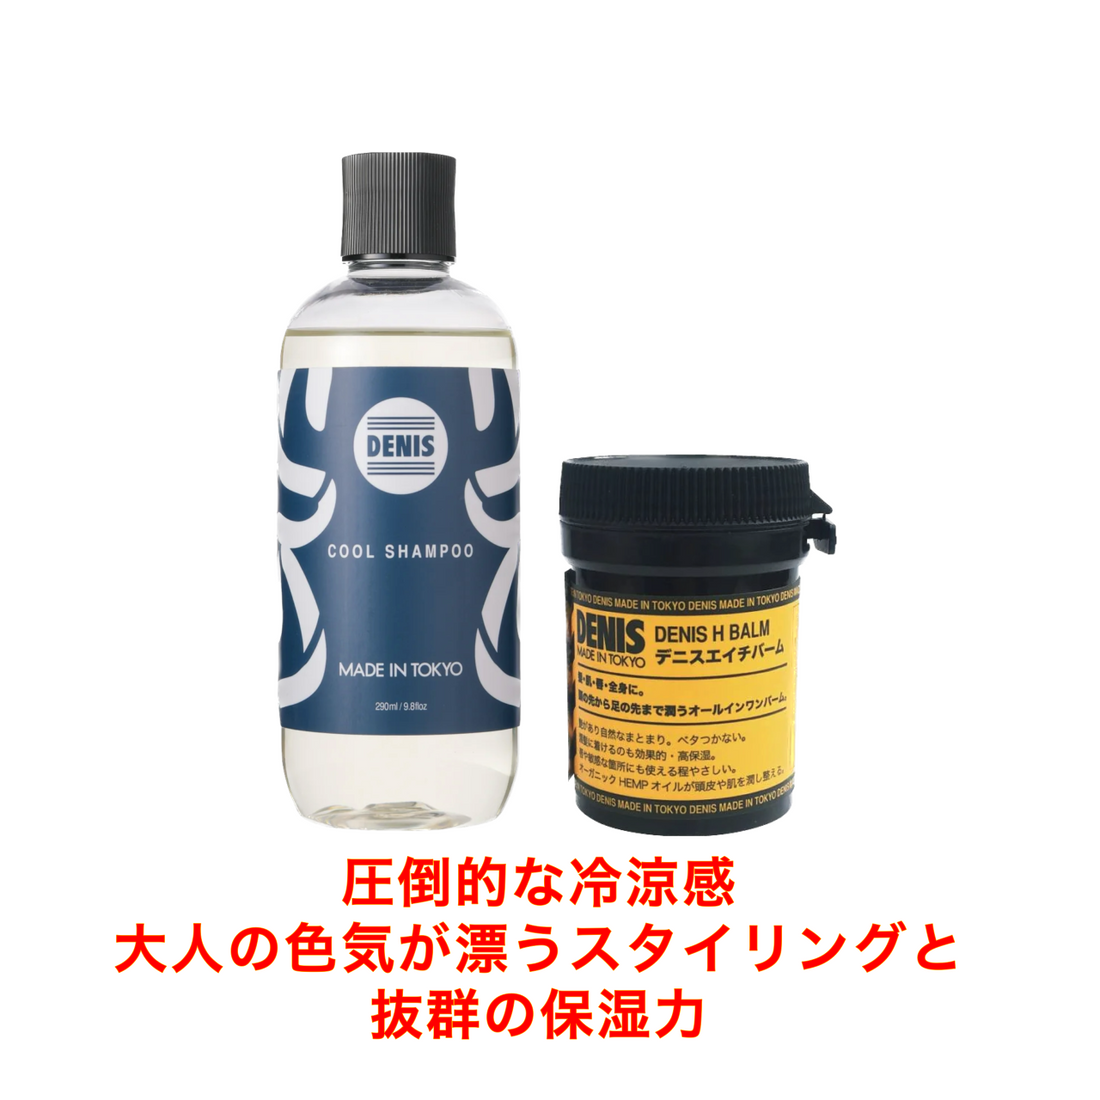 [Gift set for those who are sensitive to heat] Recommended for saunas to keep you refreshed and clean